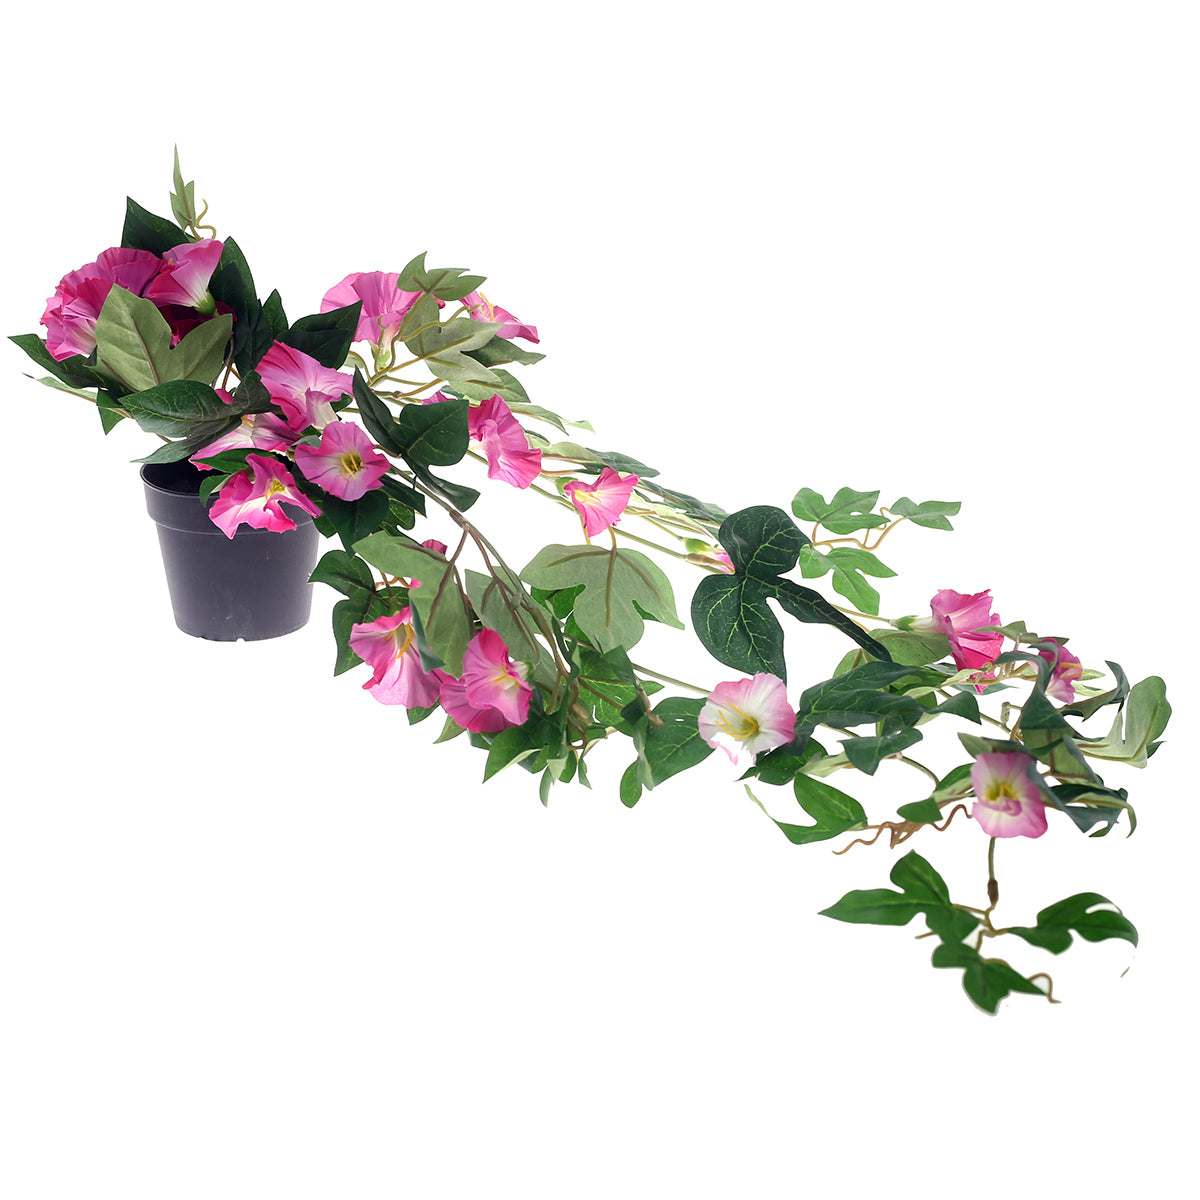 petunias hanging plants.Unspecified...22744